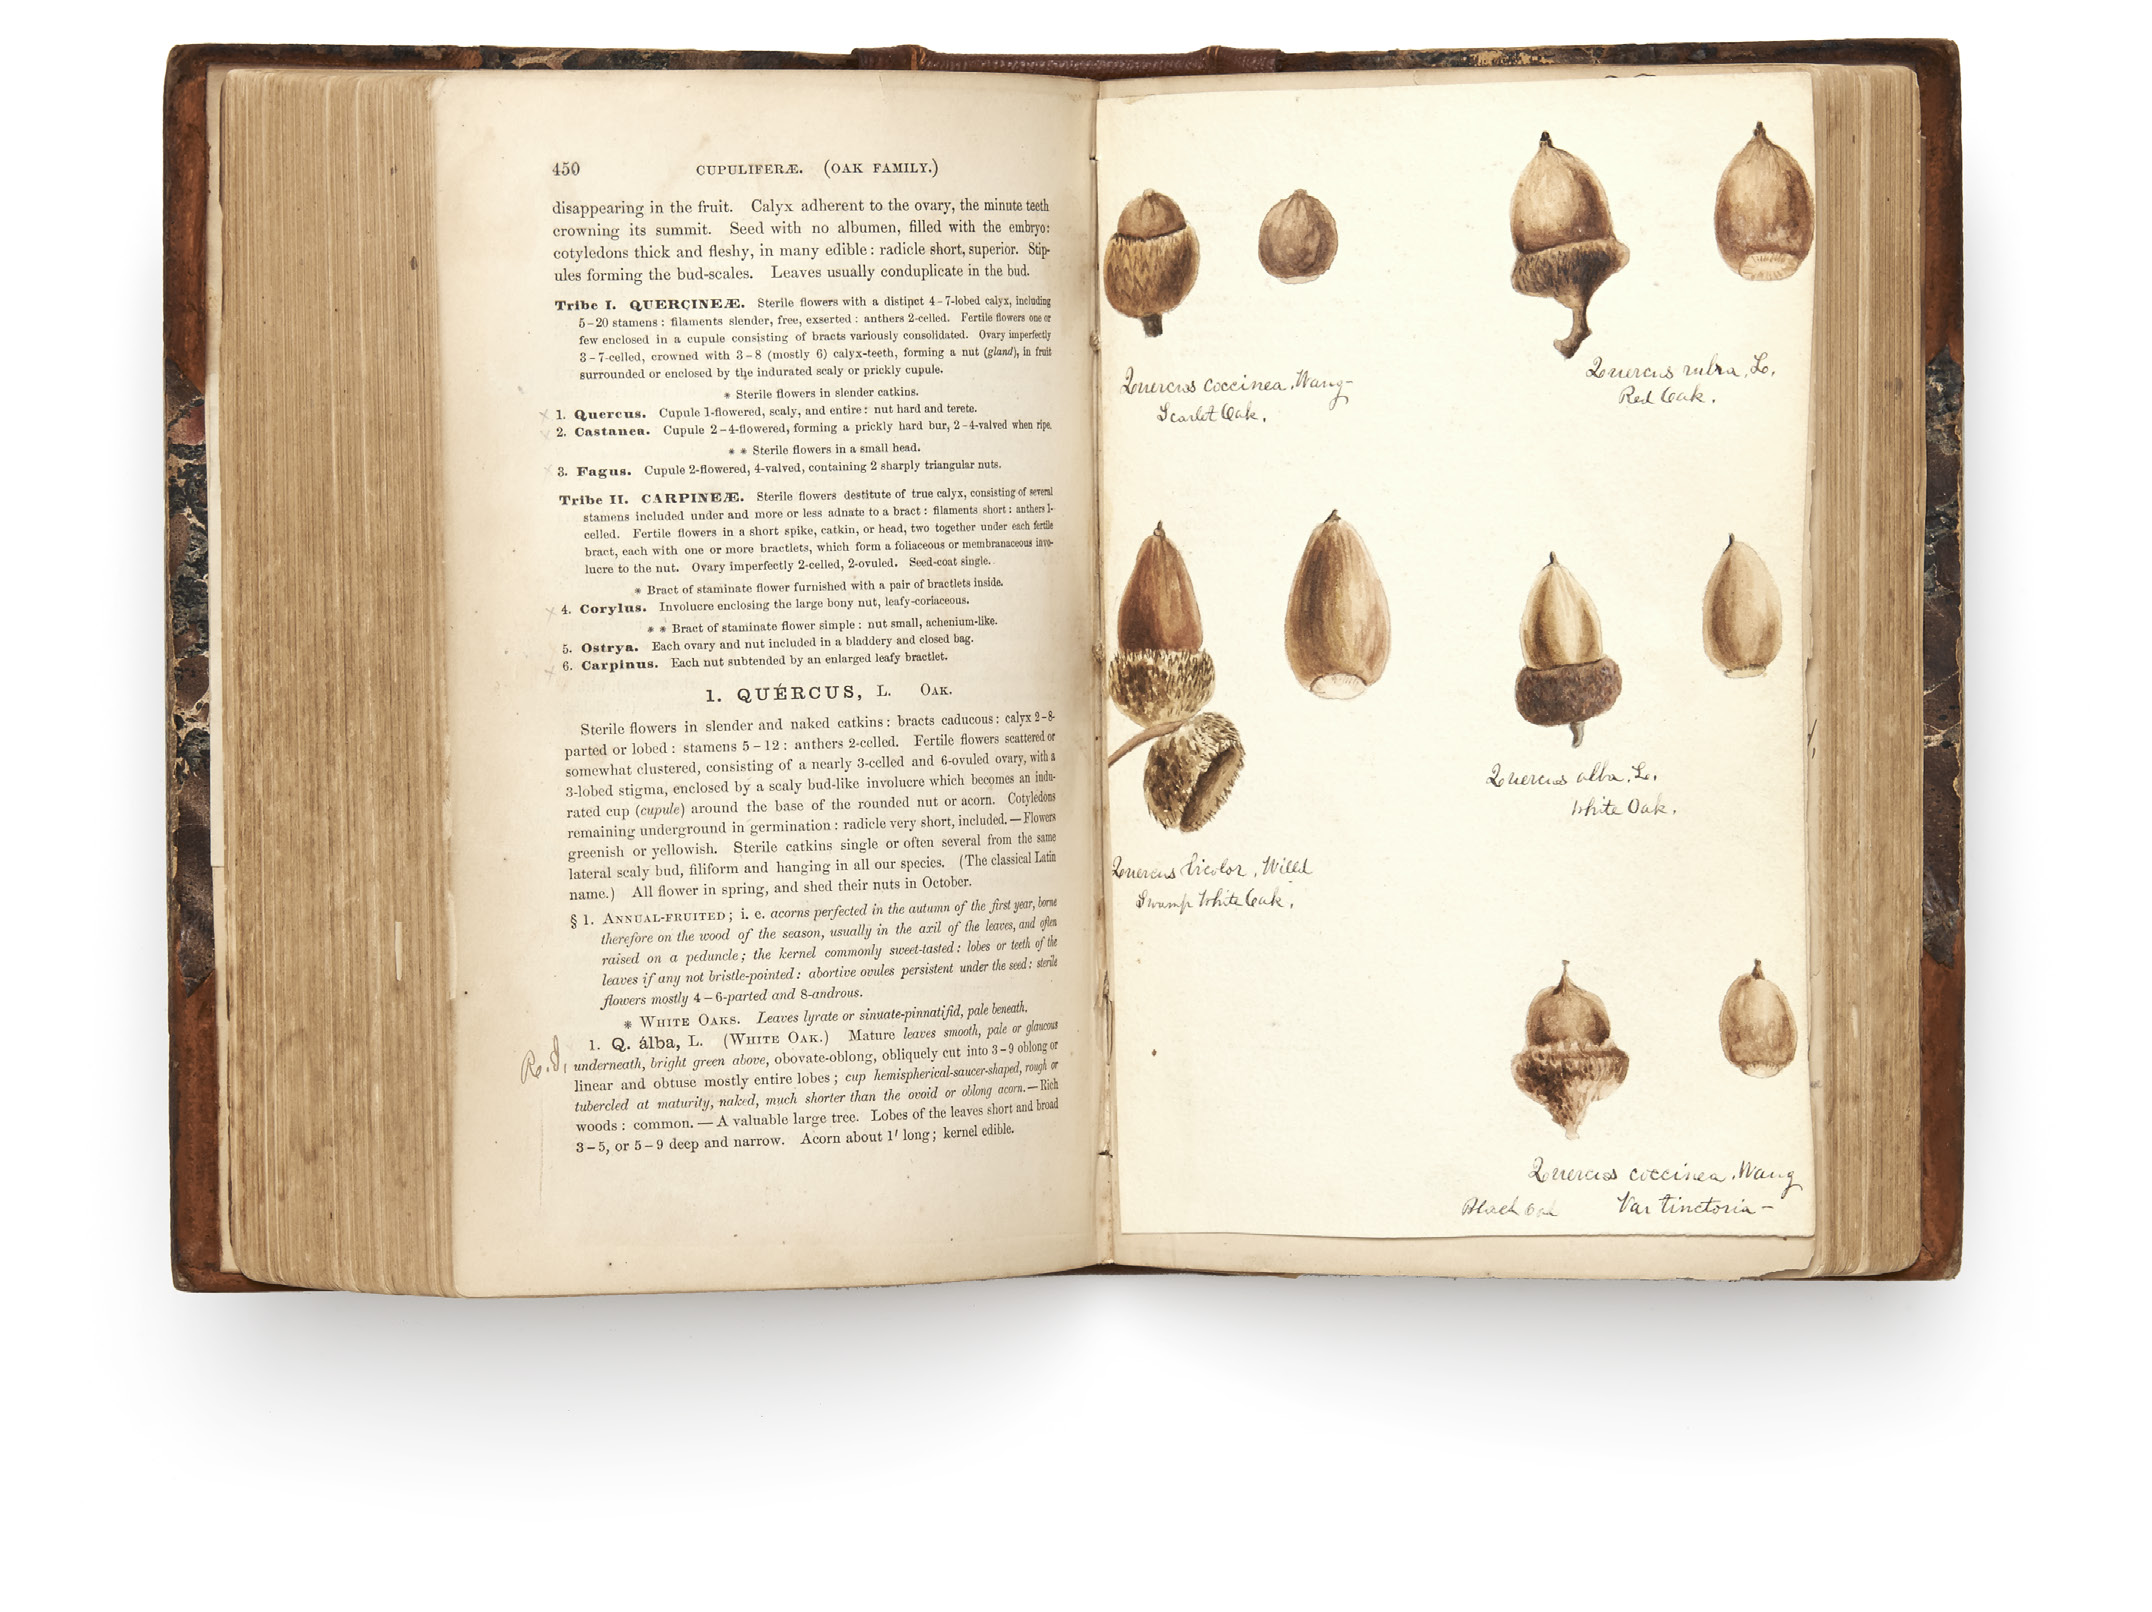 William Whitman's drawing of acorns in his copy of Manual of the Botany of the Northern United States by Asa Gray, 1868.